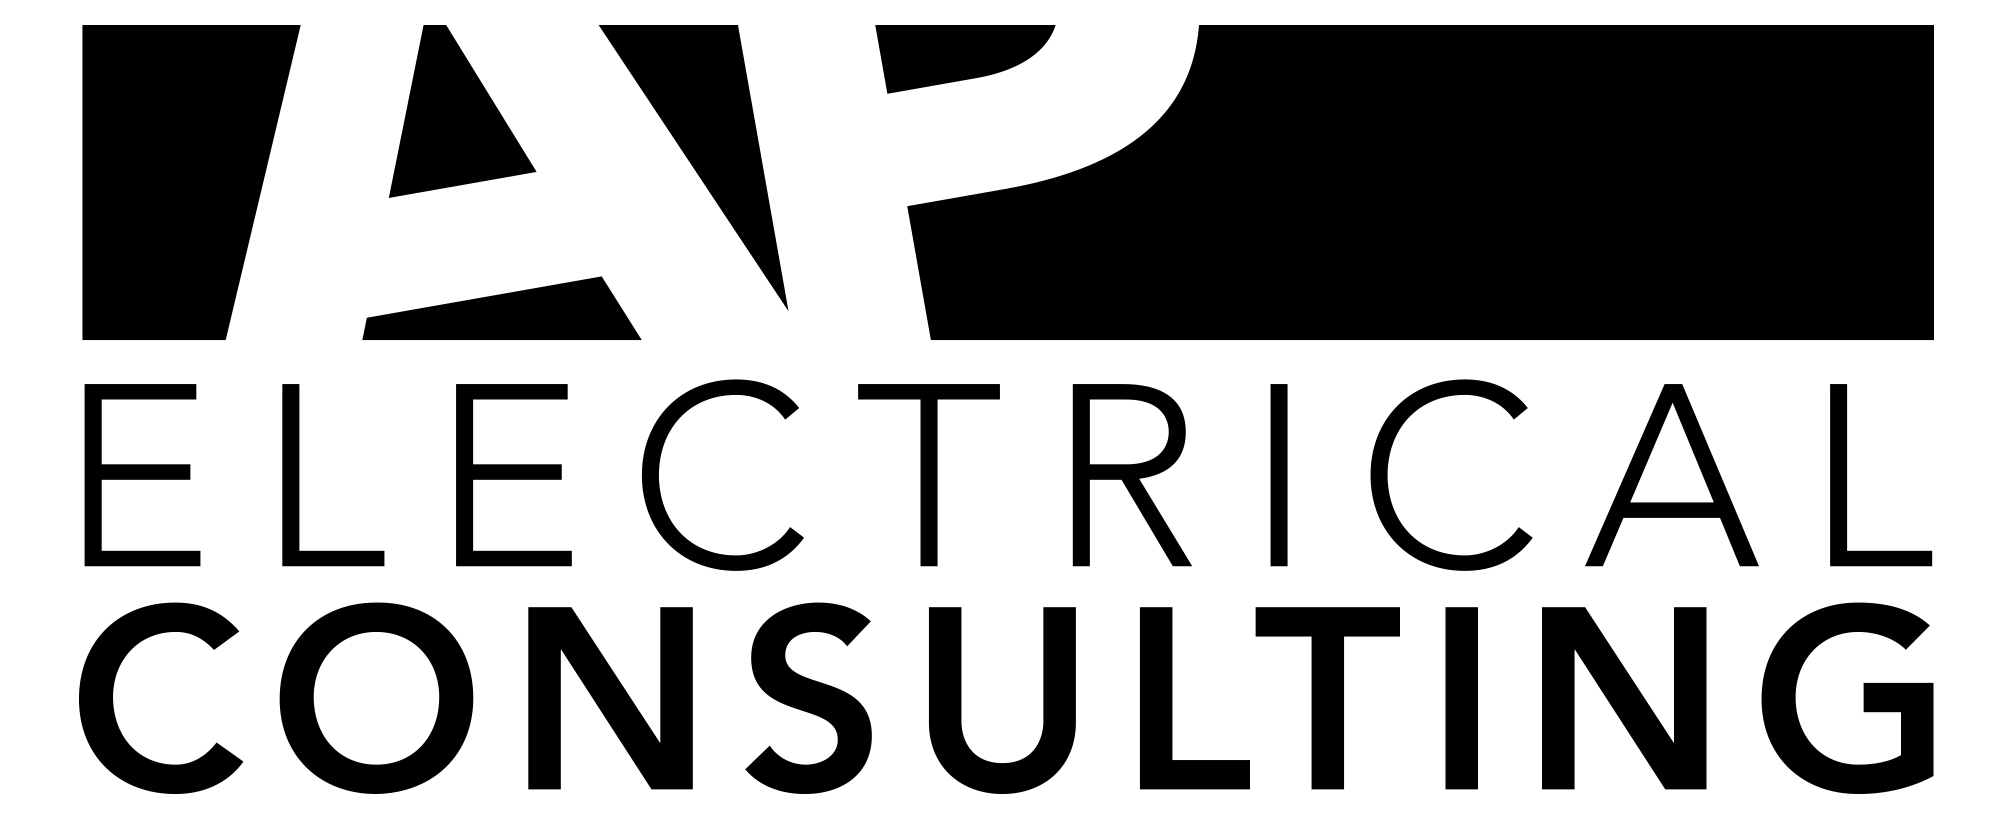 A.p. Electrical Consulting